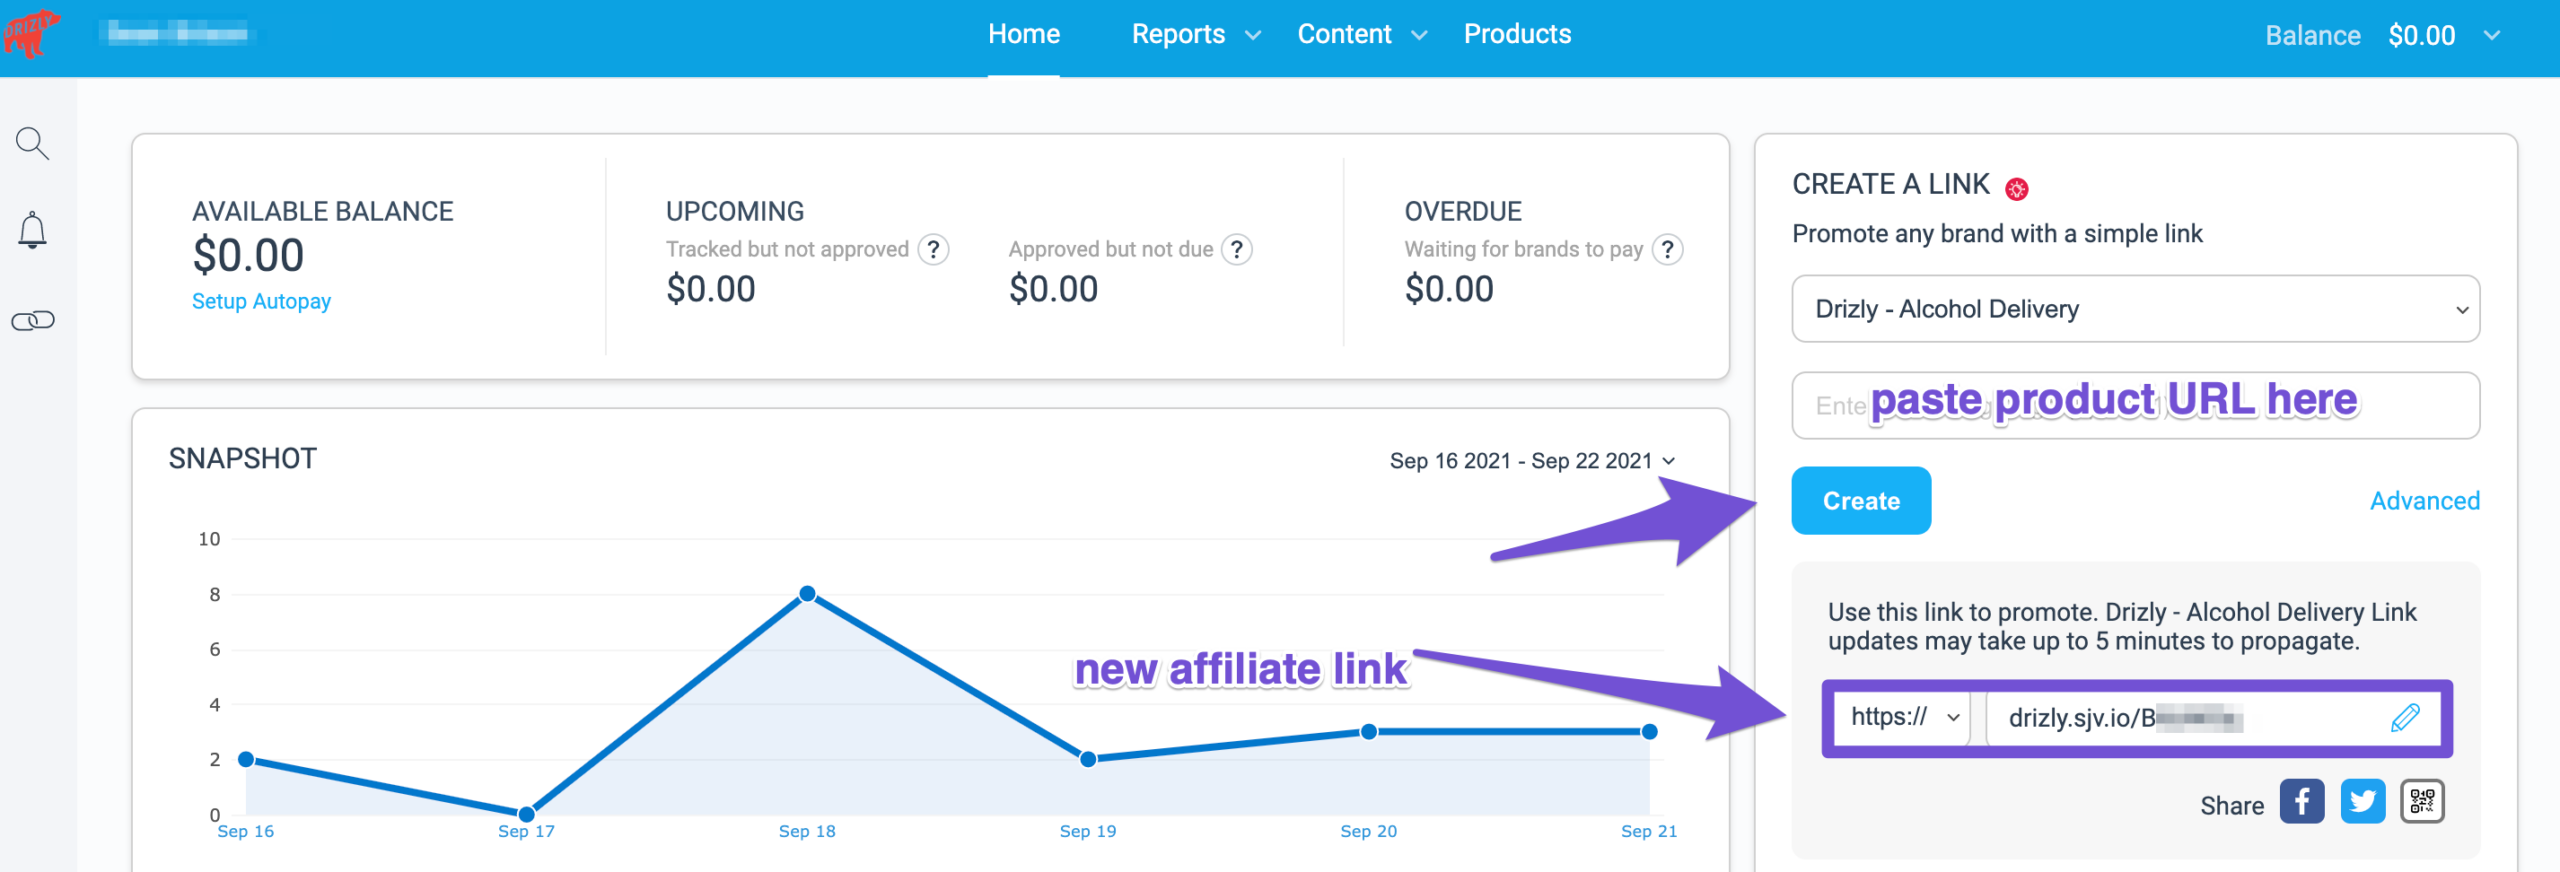 drizly dashboard on impact affiliate network